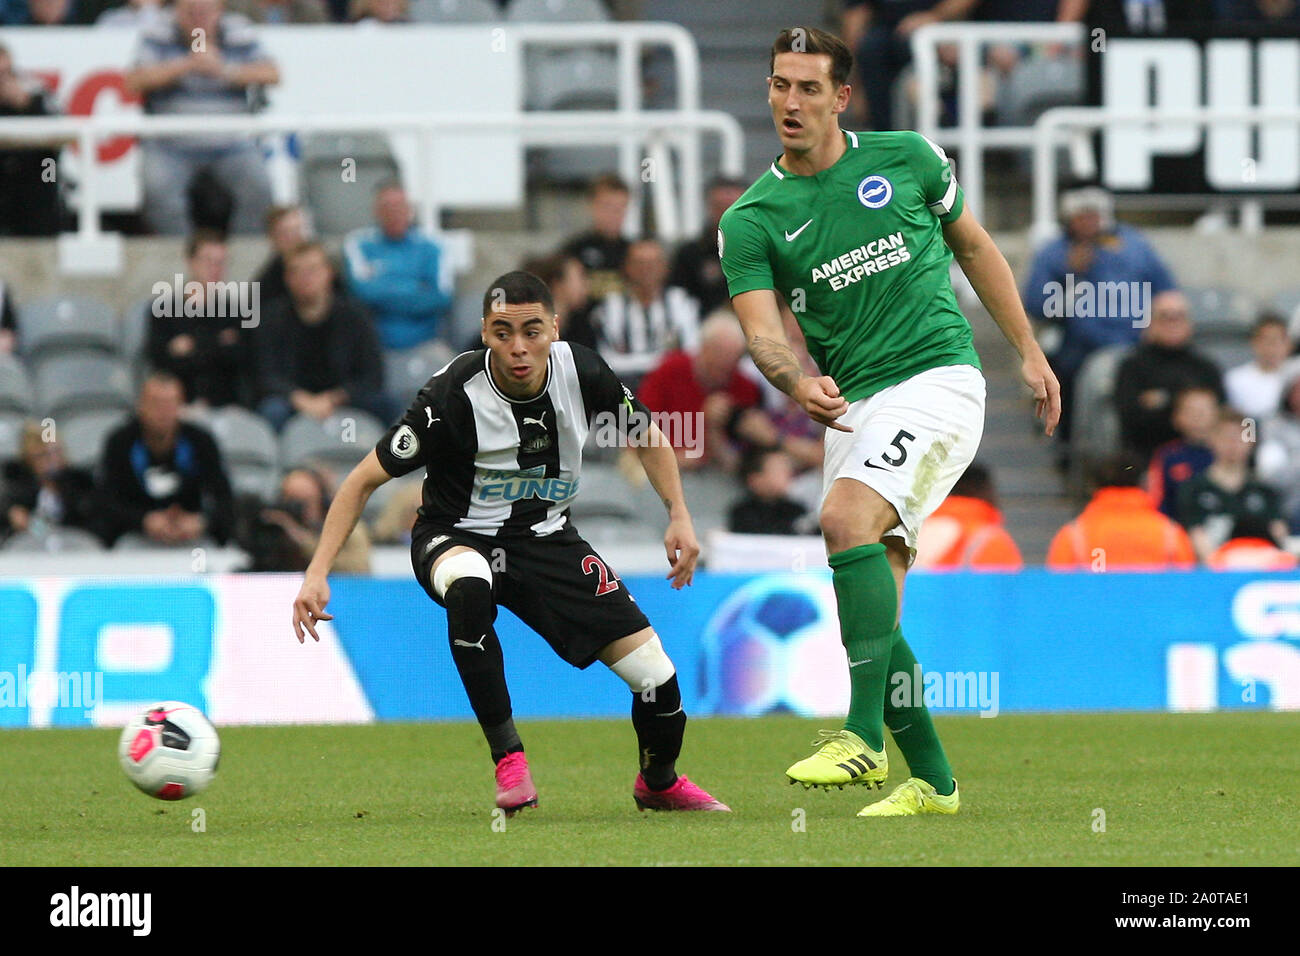 Newcastle, UK. 21st Sep, 2019.  Newcastle United's Miguel Almiron competes for the ball with Brighton & Hove Albion's Lewis Dunk during the Premier League match between Newcastle United and Brighton and Hove Albion at St. James's Park, Newcastle on Saturday 21st September 2019. (Credit: Steven Hadlow | MI News)Photograph may only be used for newspaper and/or magazine editorial purposes, license required for commercial use Credit: MI News & Sport /Alamy Live News Stock Photo